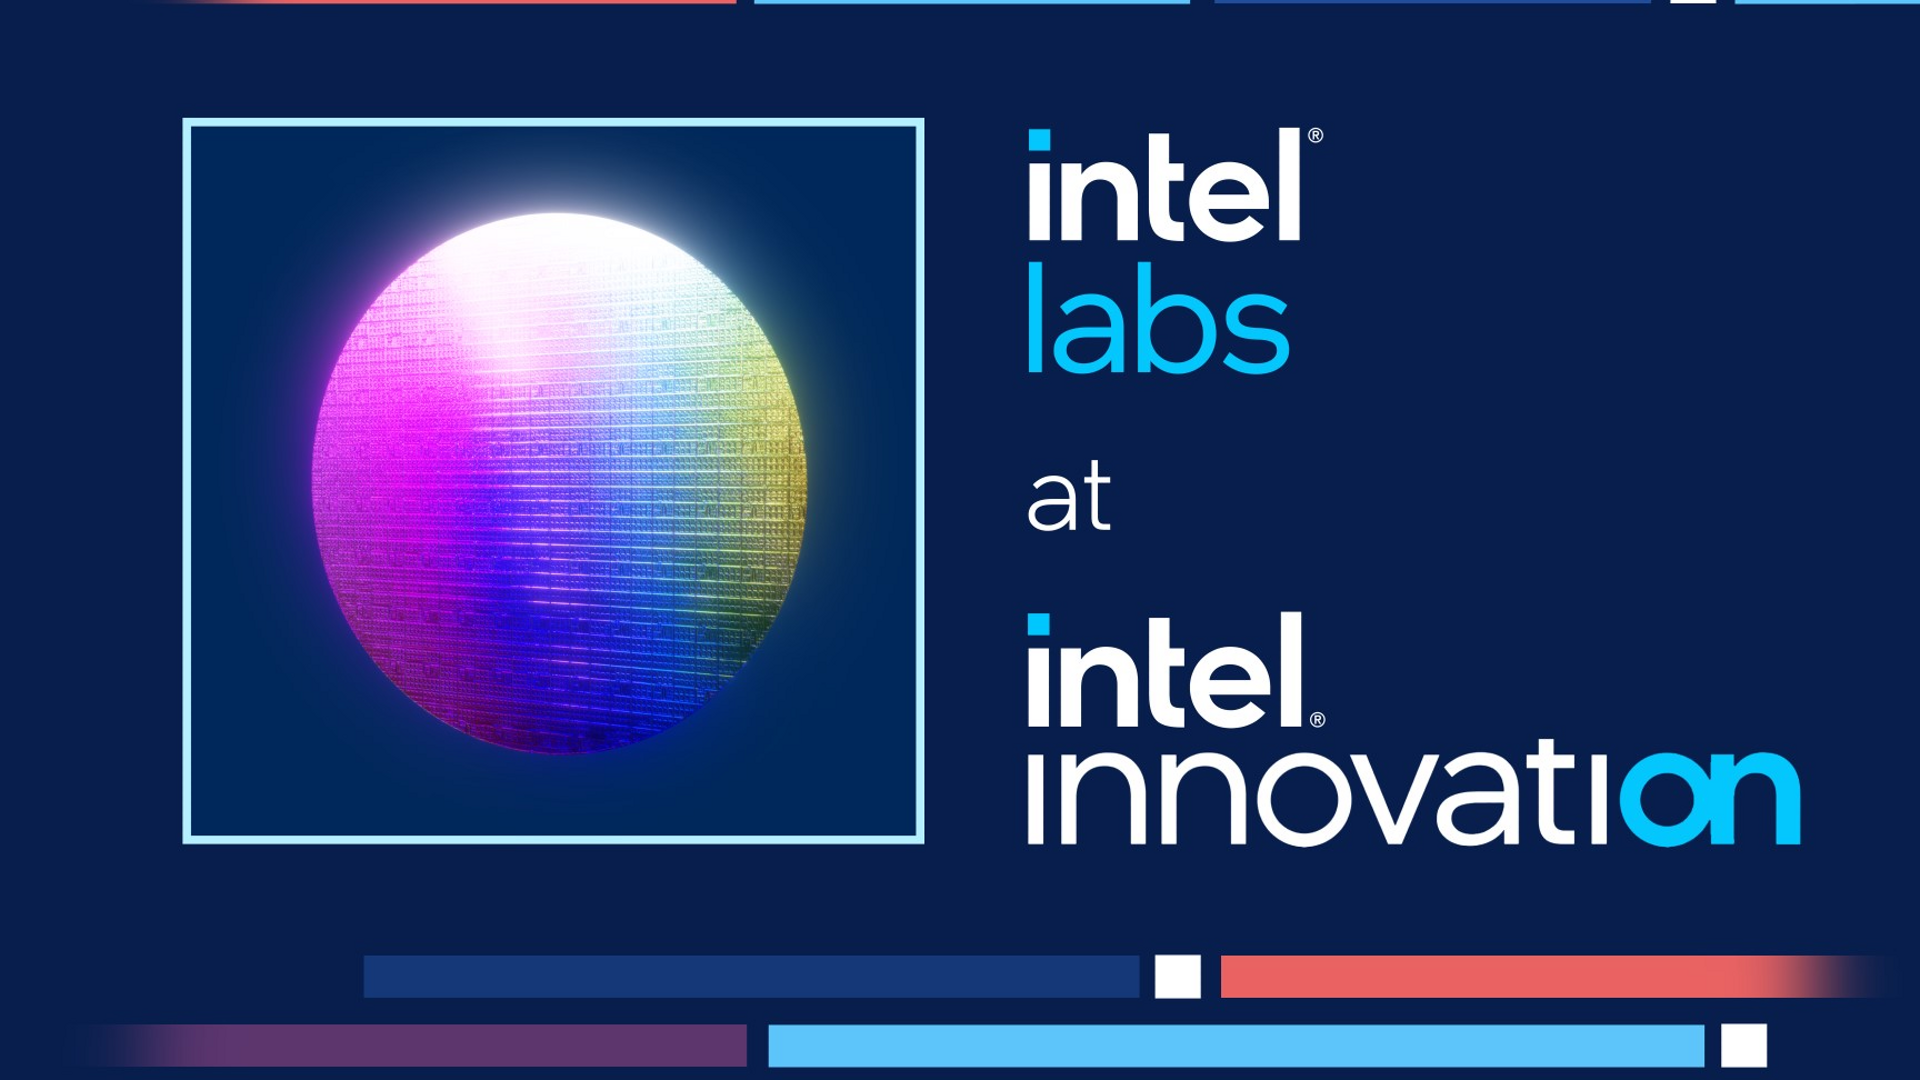 Deep inside Intel's NUC: We visited Intel's lab to learn the secrets of  tiny computing